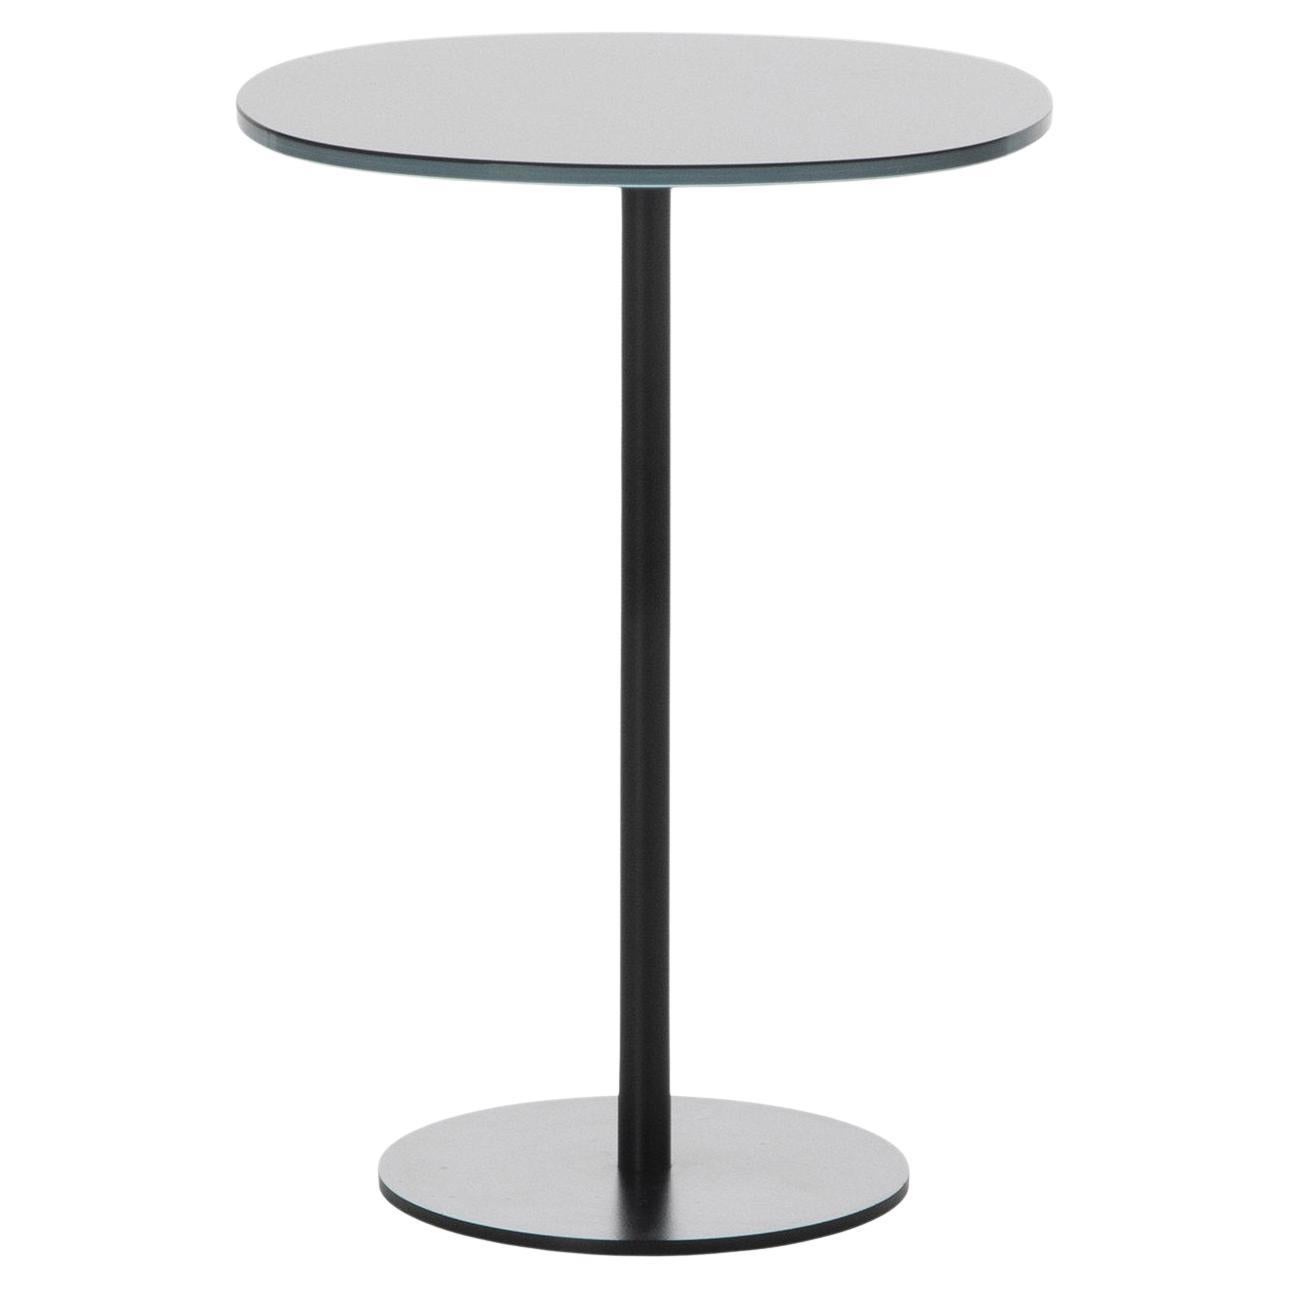 Solenoide Black Tall Side Table by Piero Lissoni